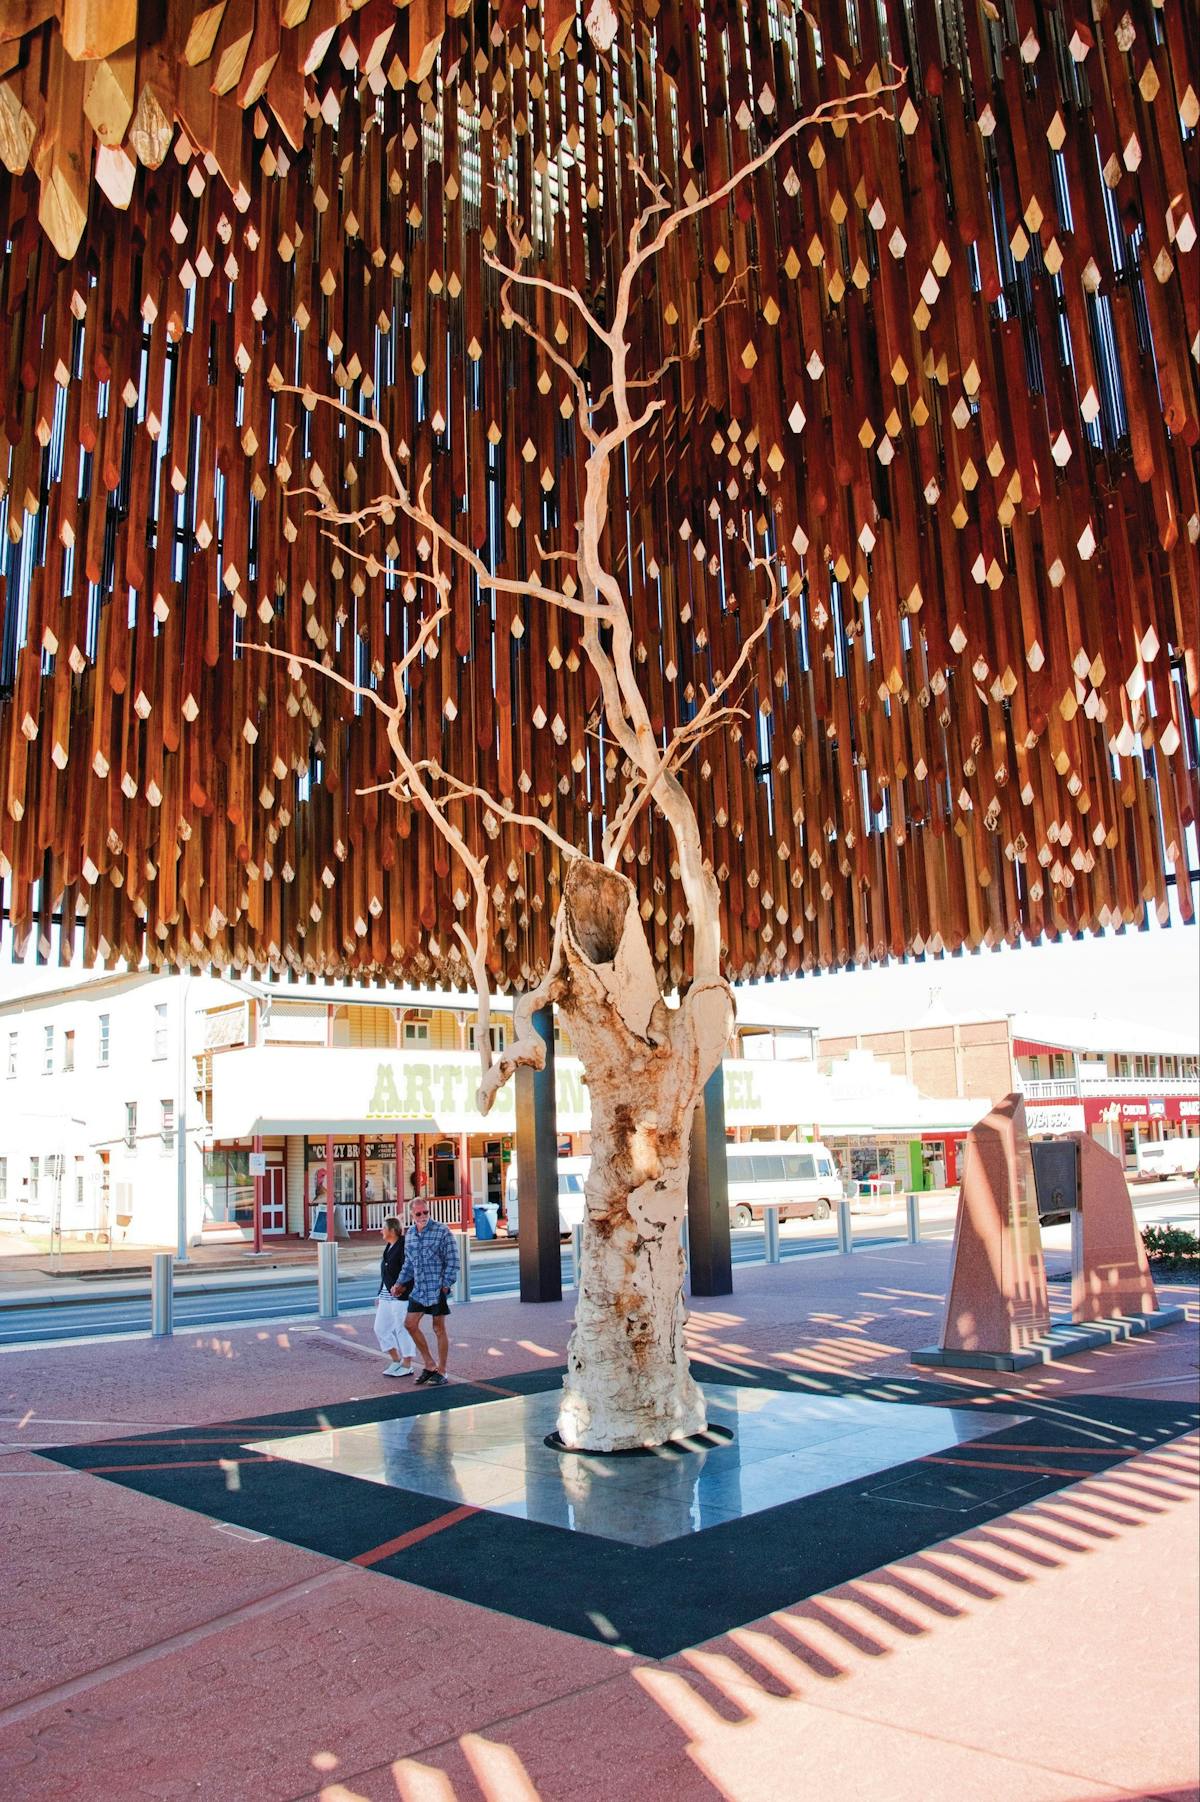 The Beautiful Tree of Knowledge in the Centre of Town